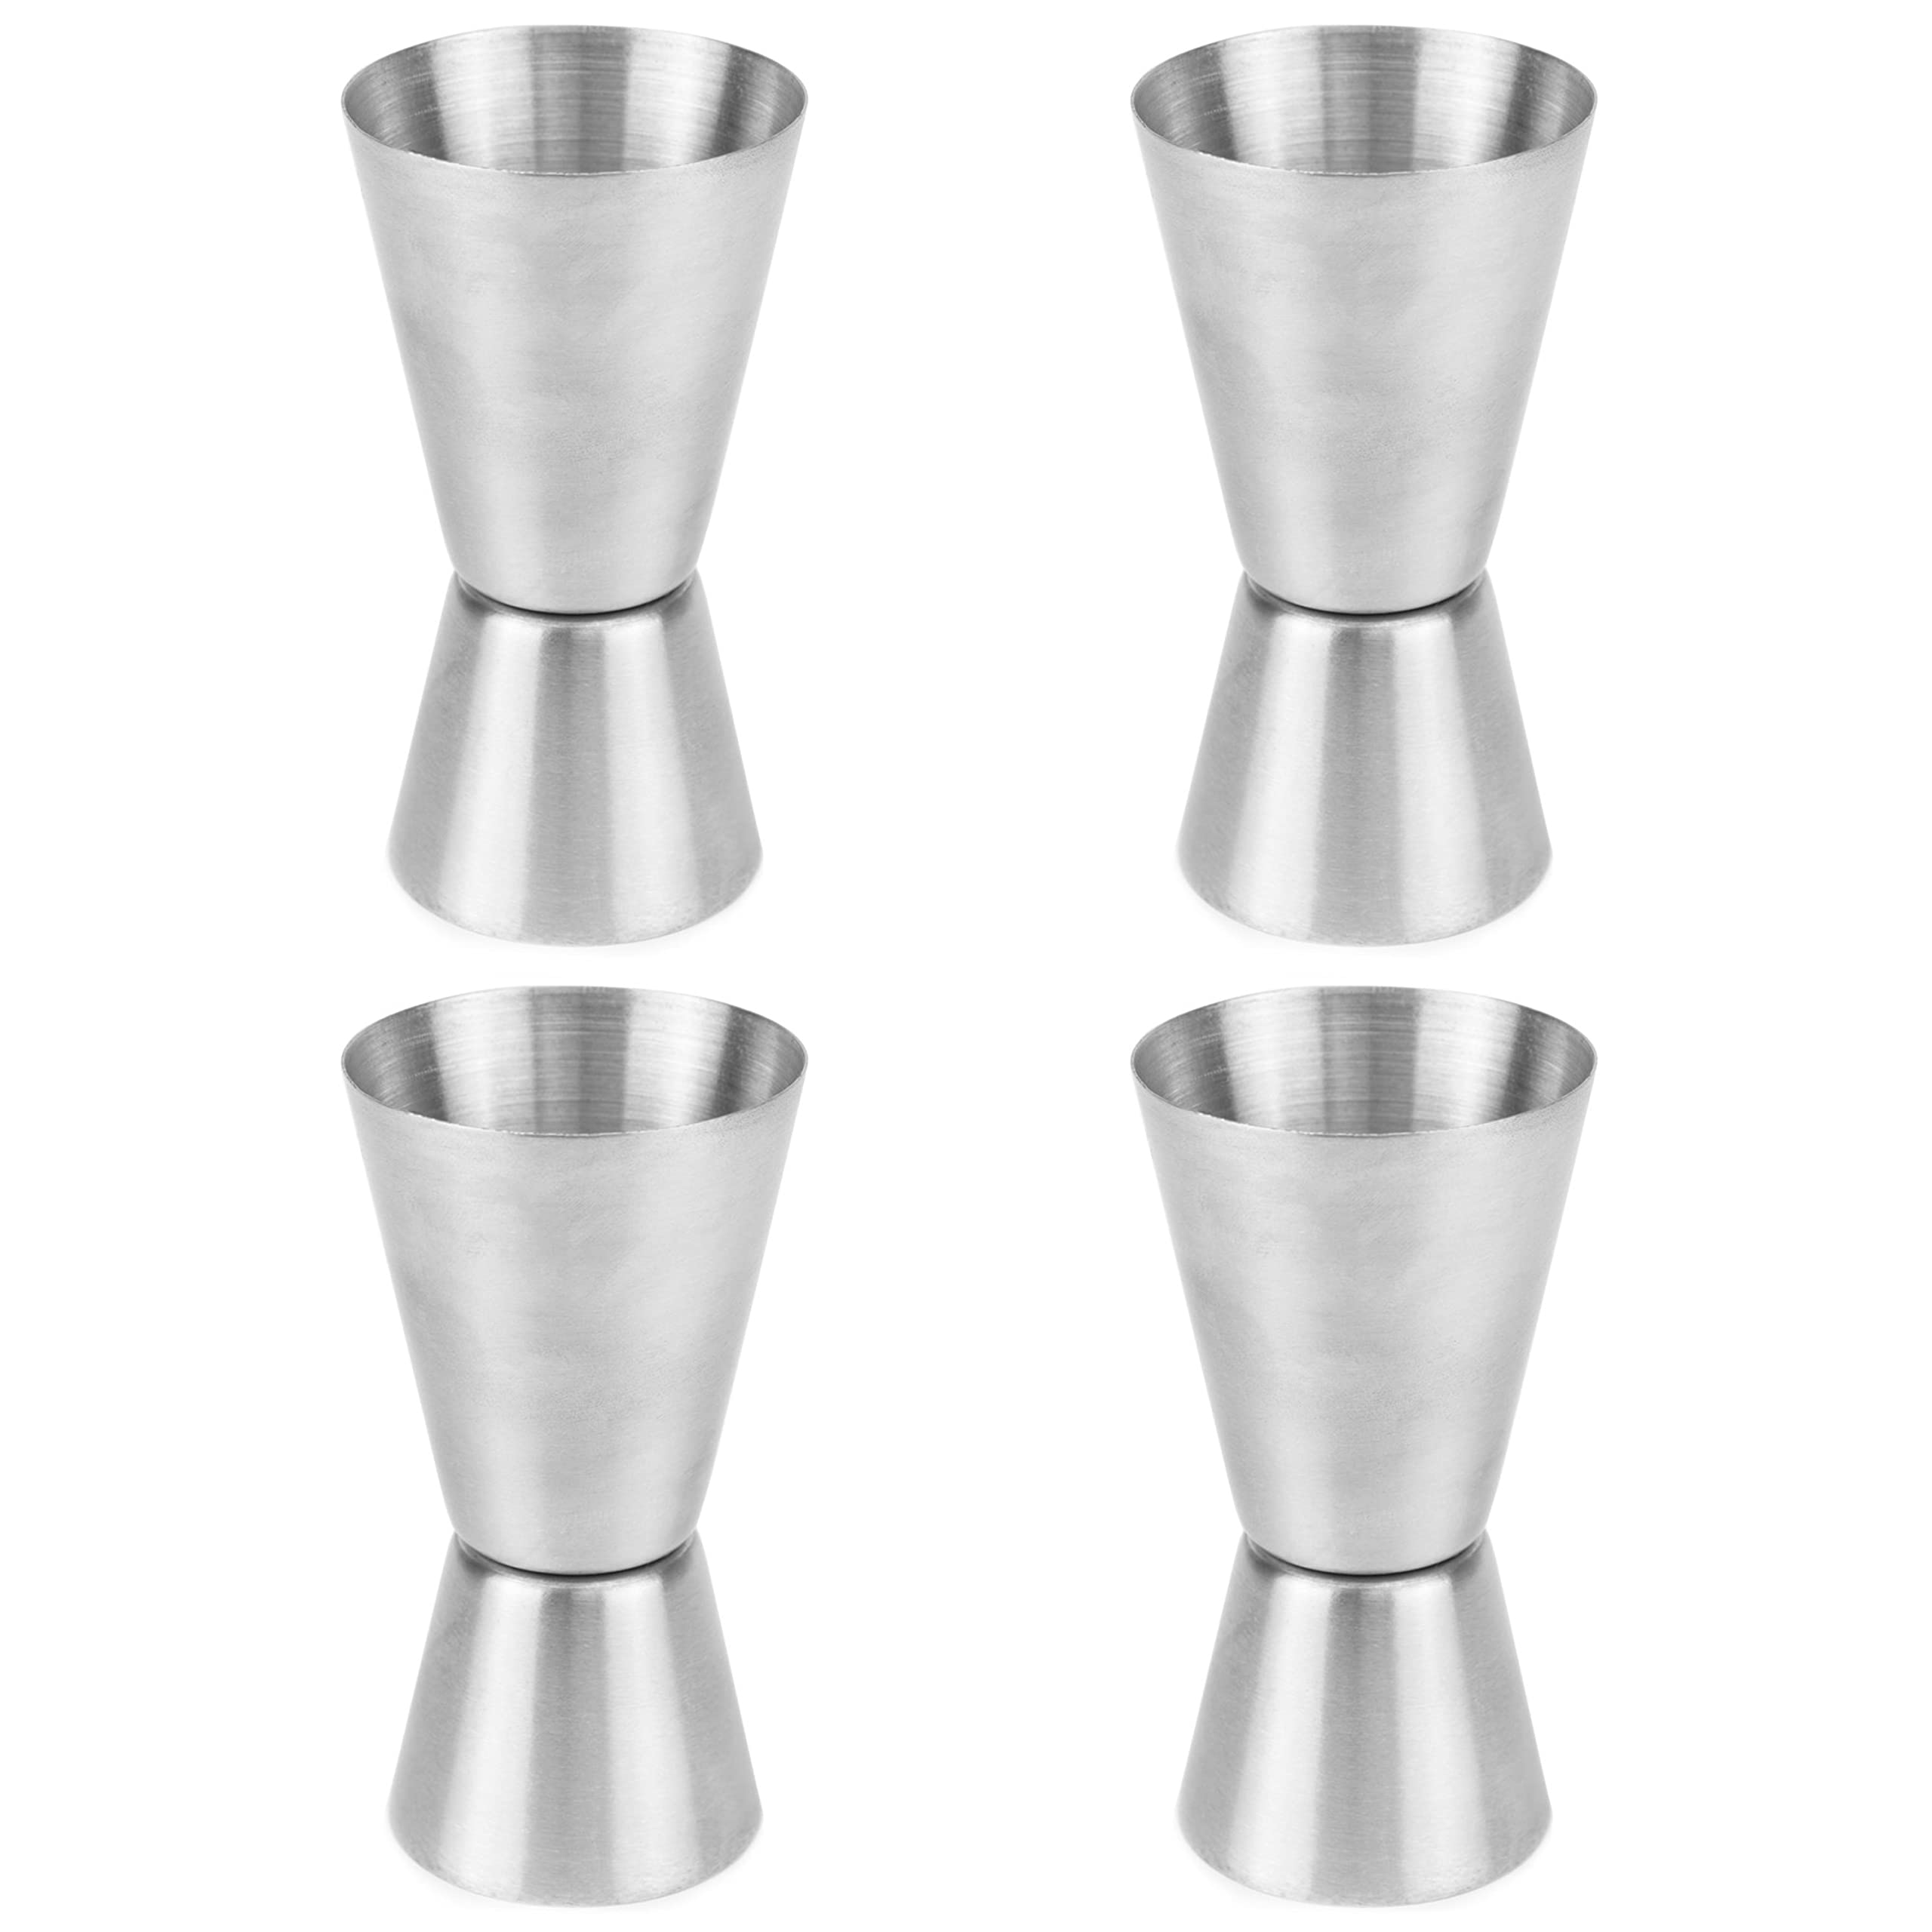 Cocktailor Set of 4 Stainless Steel Double Cocktail Jiggers for Bar, Restaurant or Home Use - 1oz & 2oz